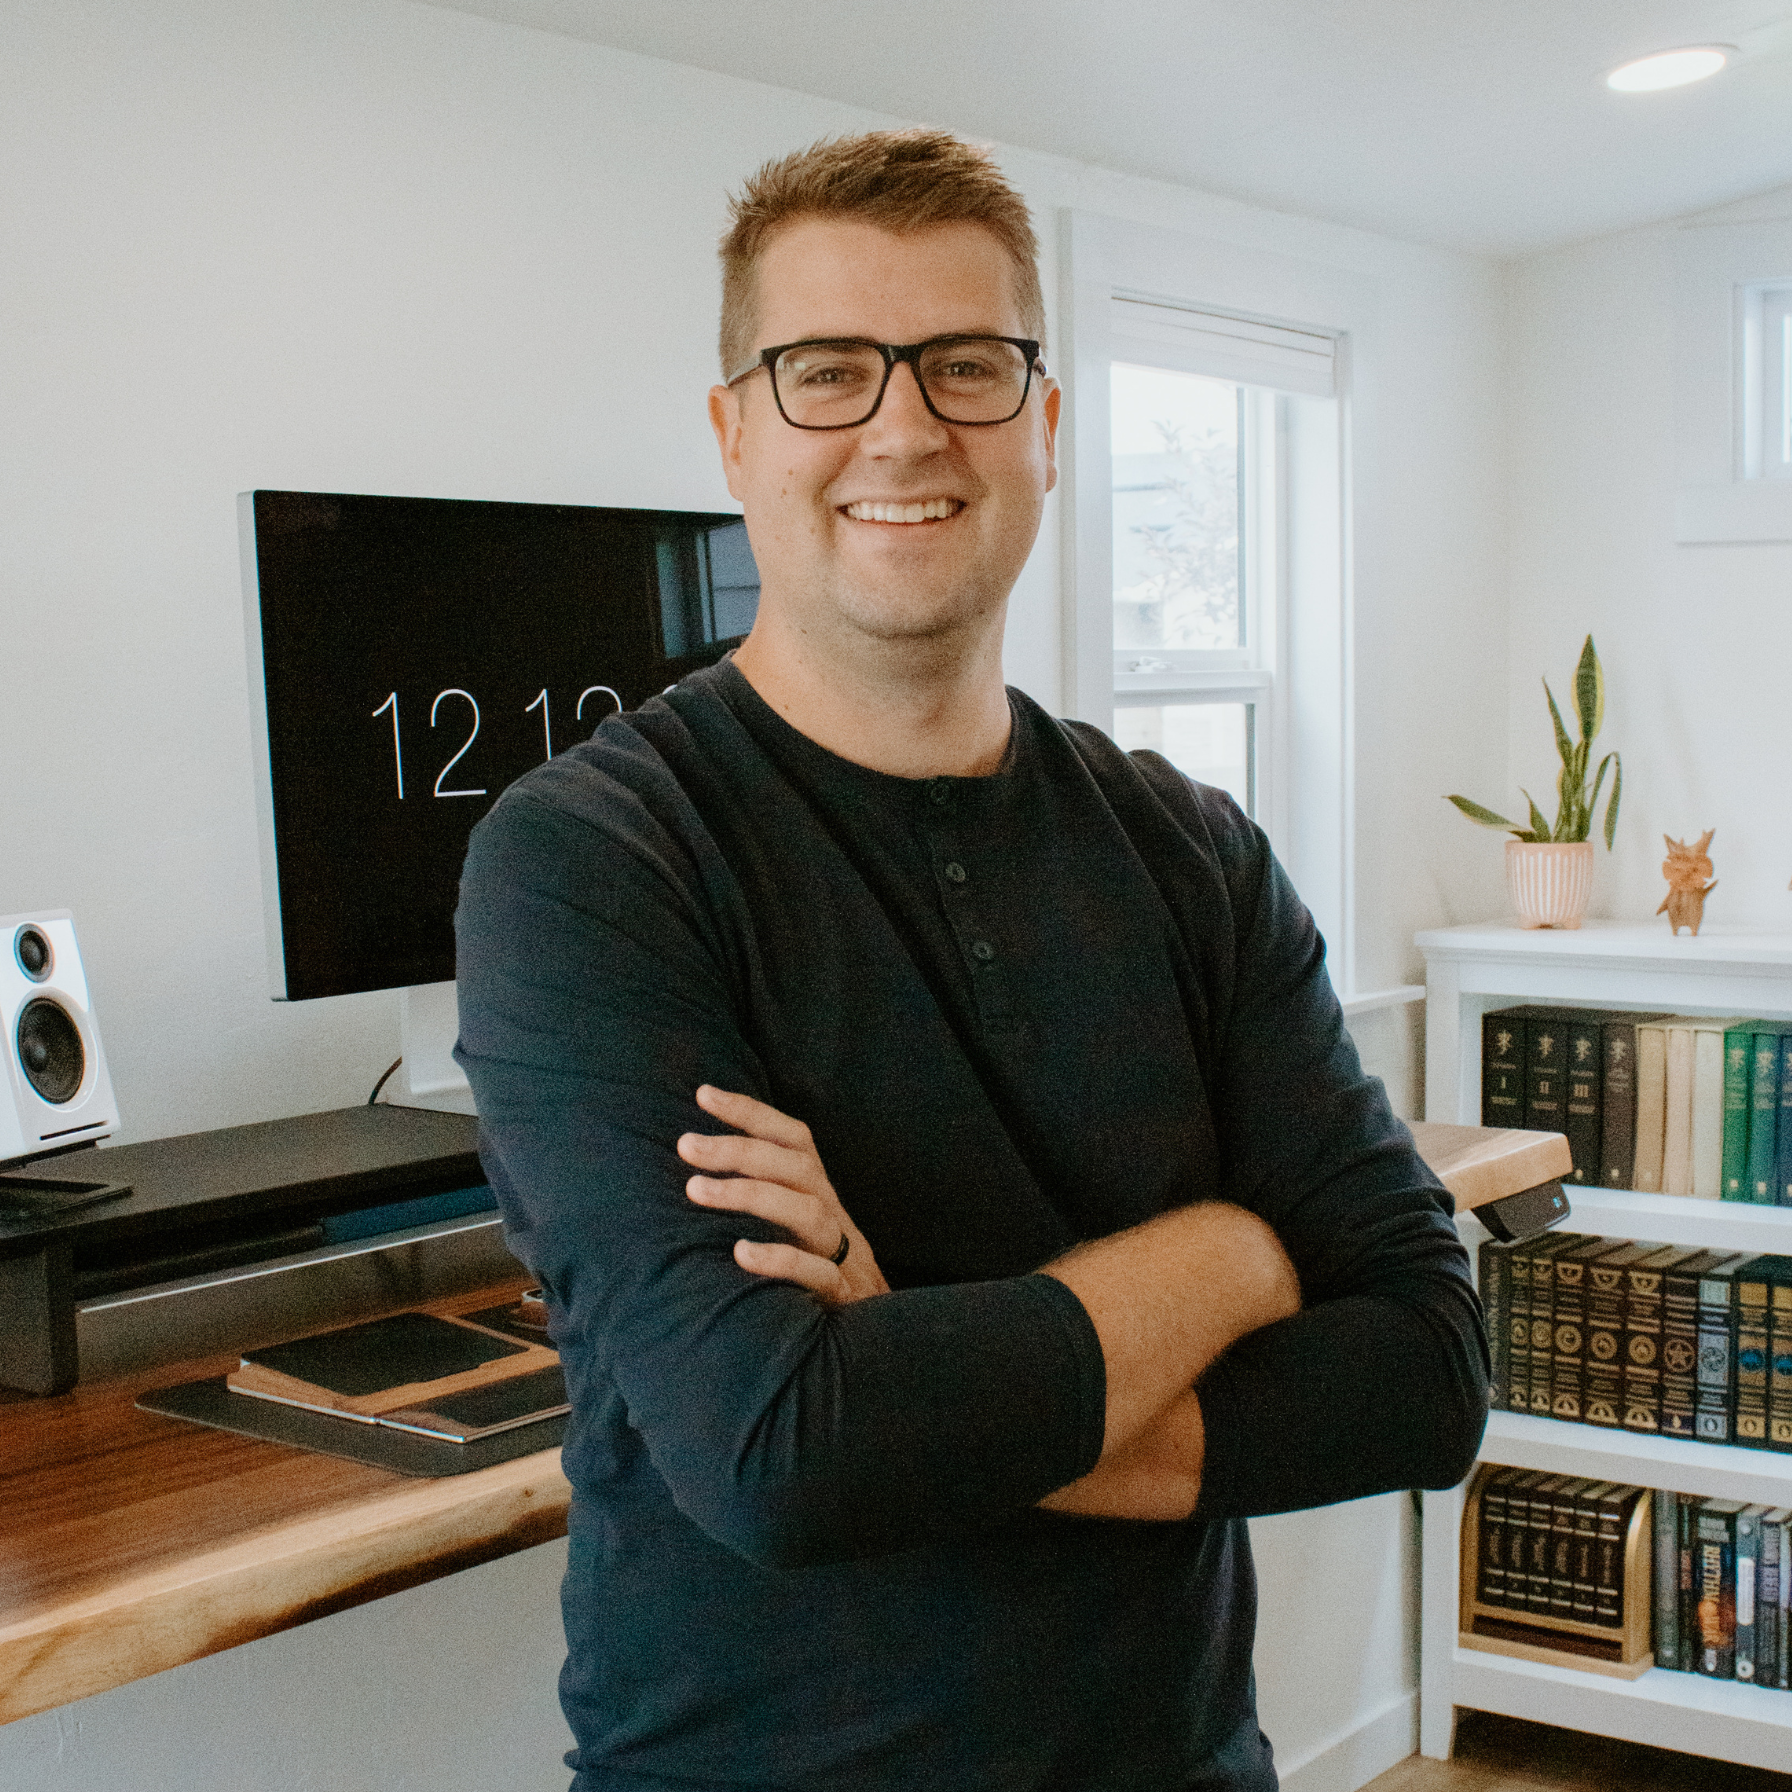 Image of Brian, owner of BrandStack, in his office folding his arms